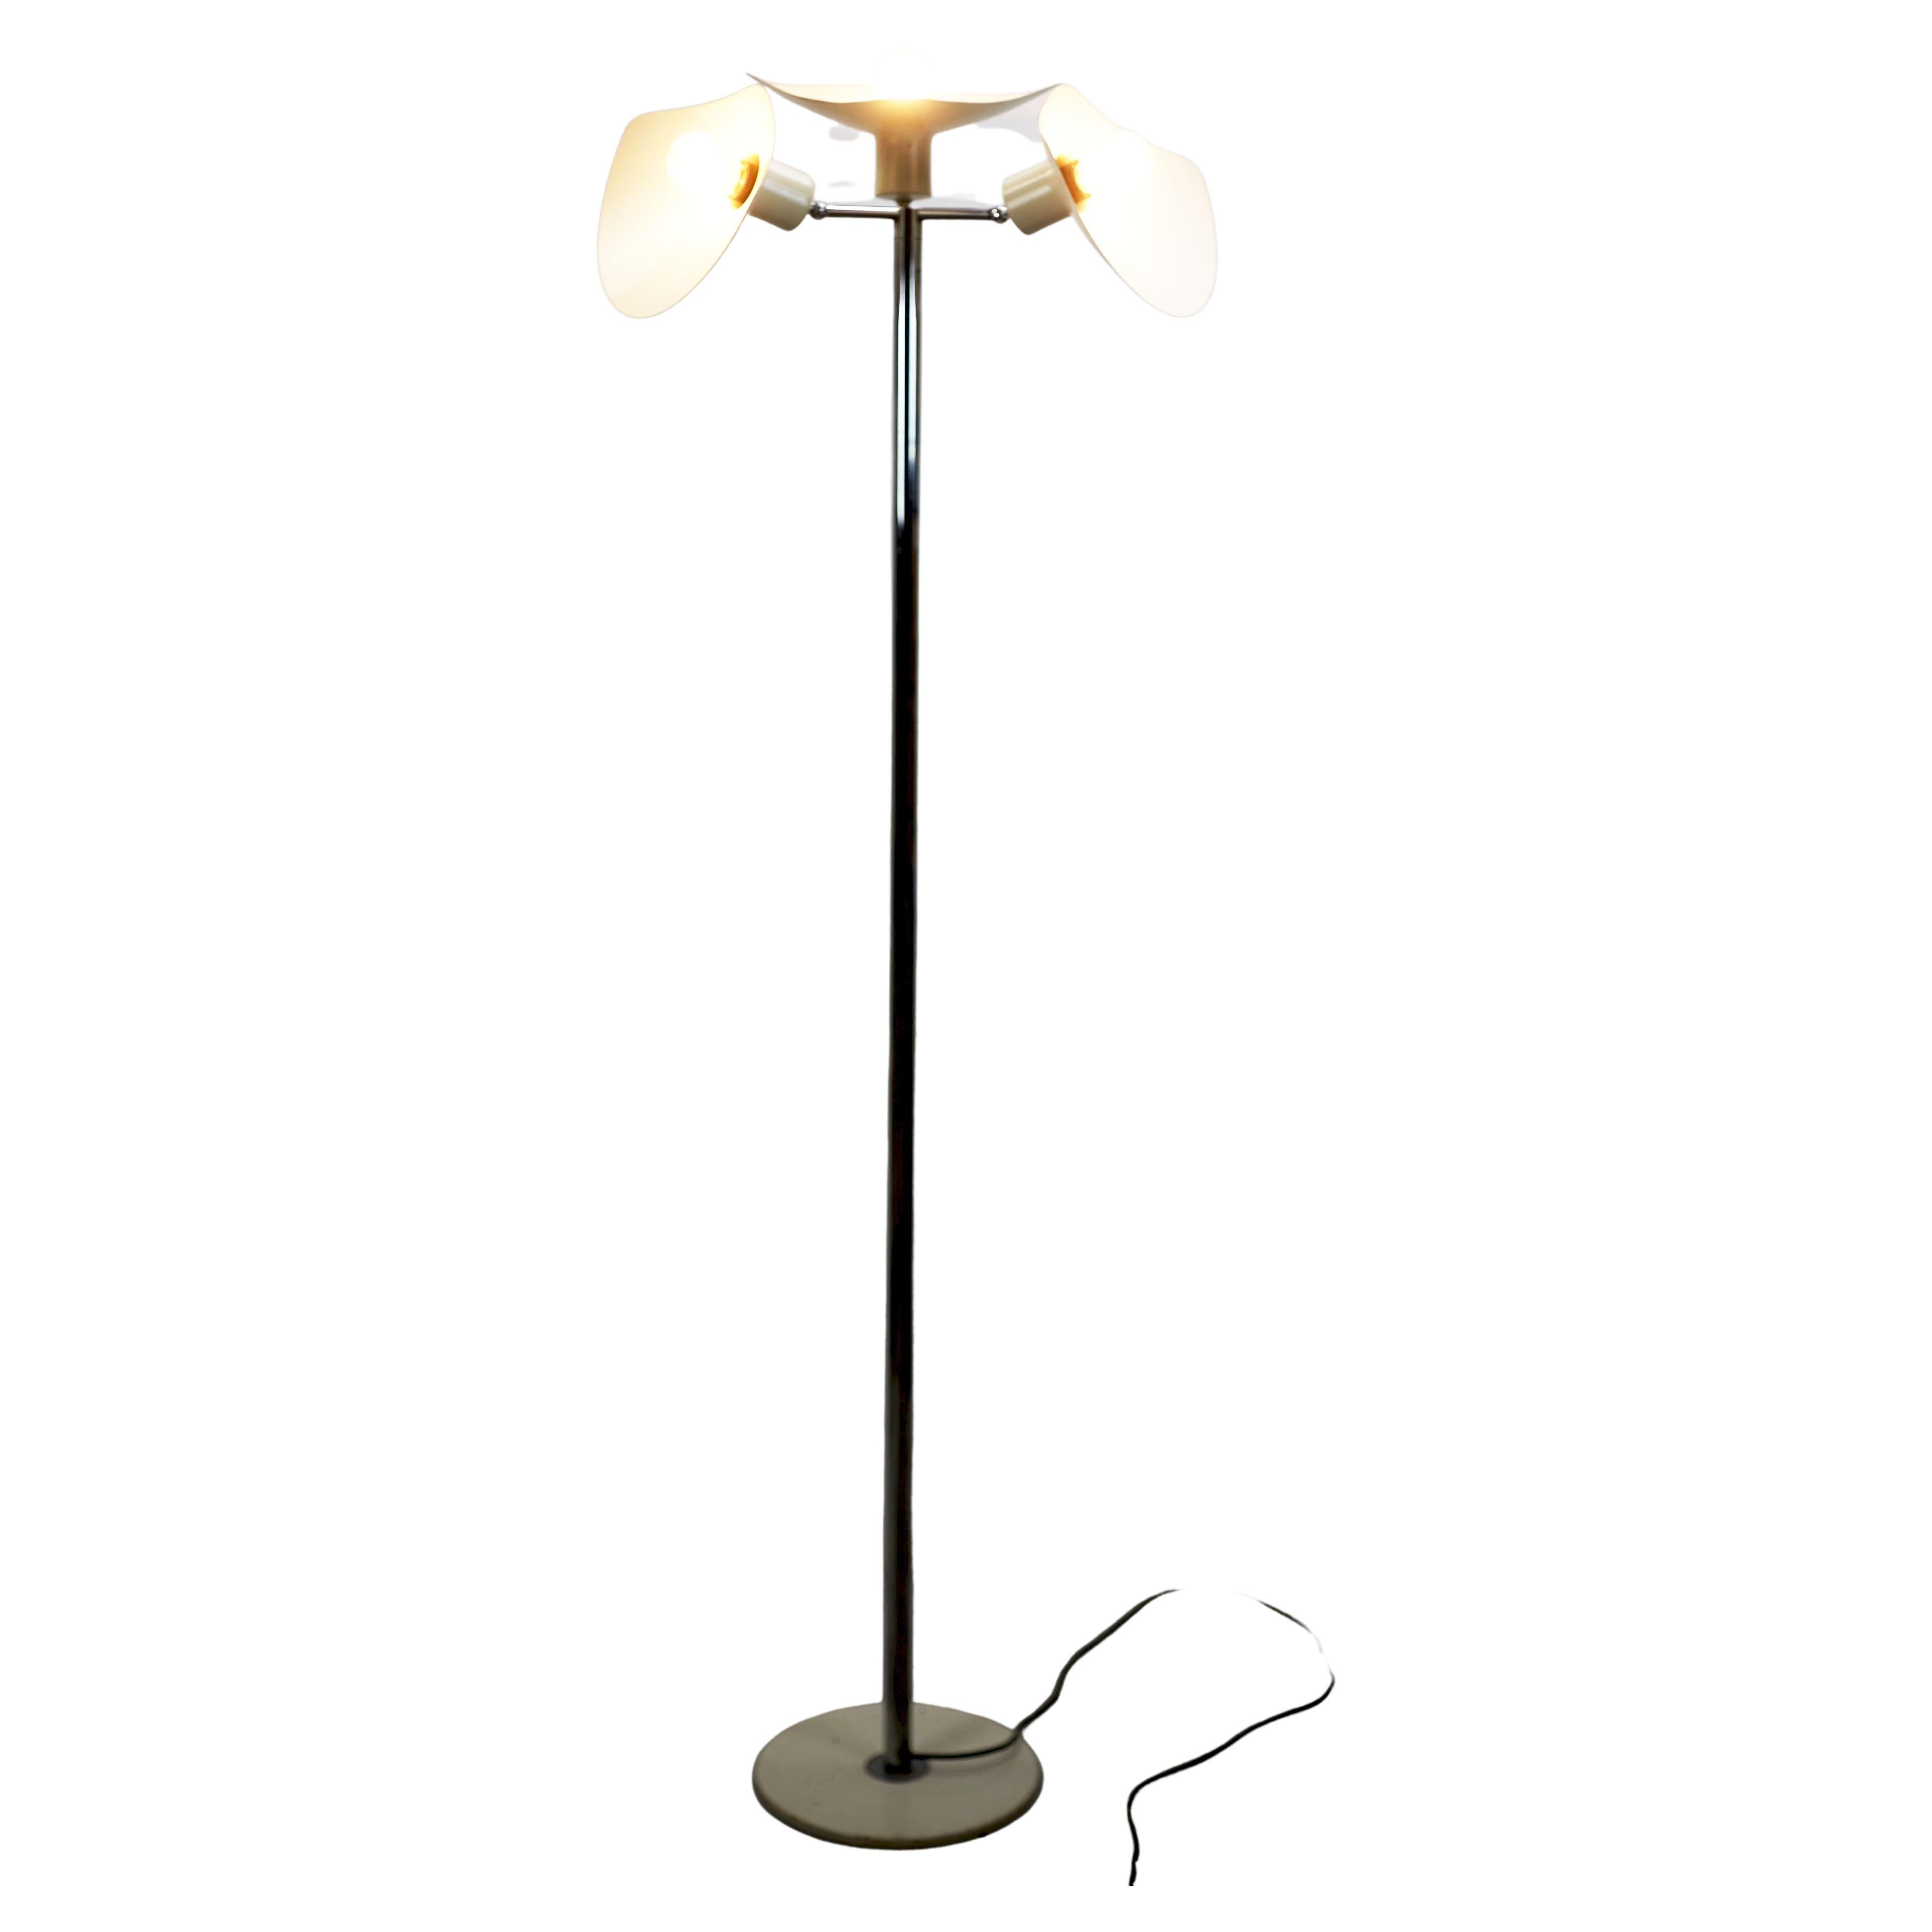 This uplighting floor lamp from the 1960s features three eggshell-colored wings made from painted aluminum, mounted on chromed adjustable joints. The standpipe is chromed, and the piece requires three E27 bulbs (not included). In a fully functional